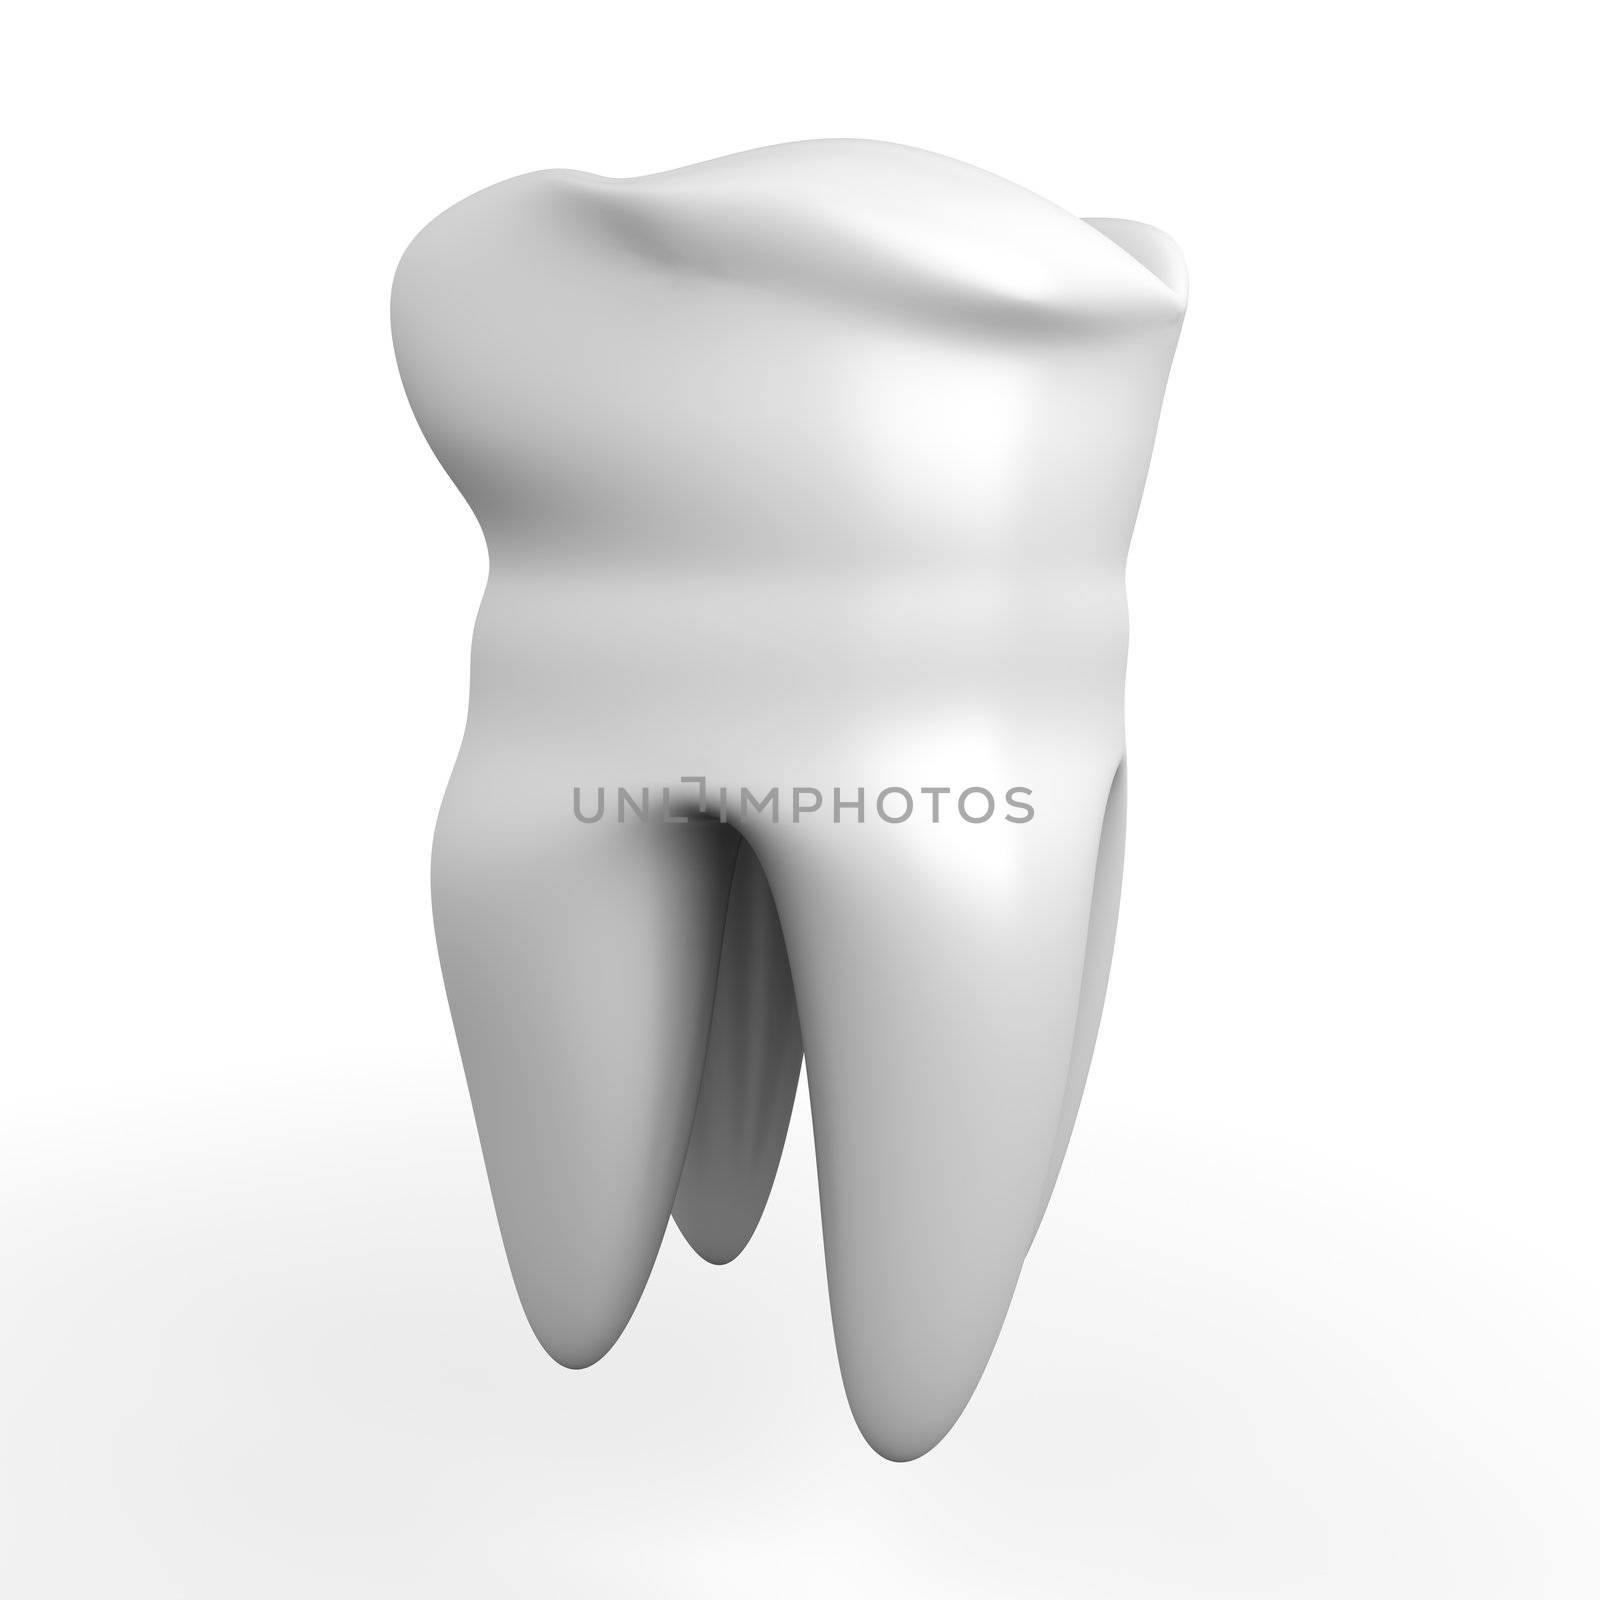 3D rendered illustration. Isolated on white.